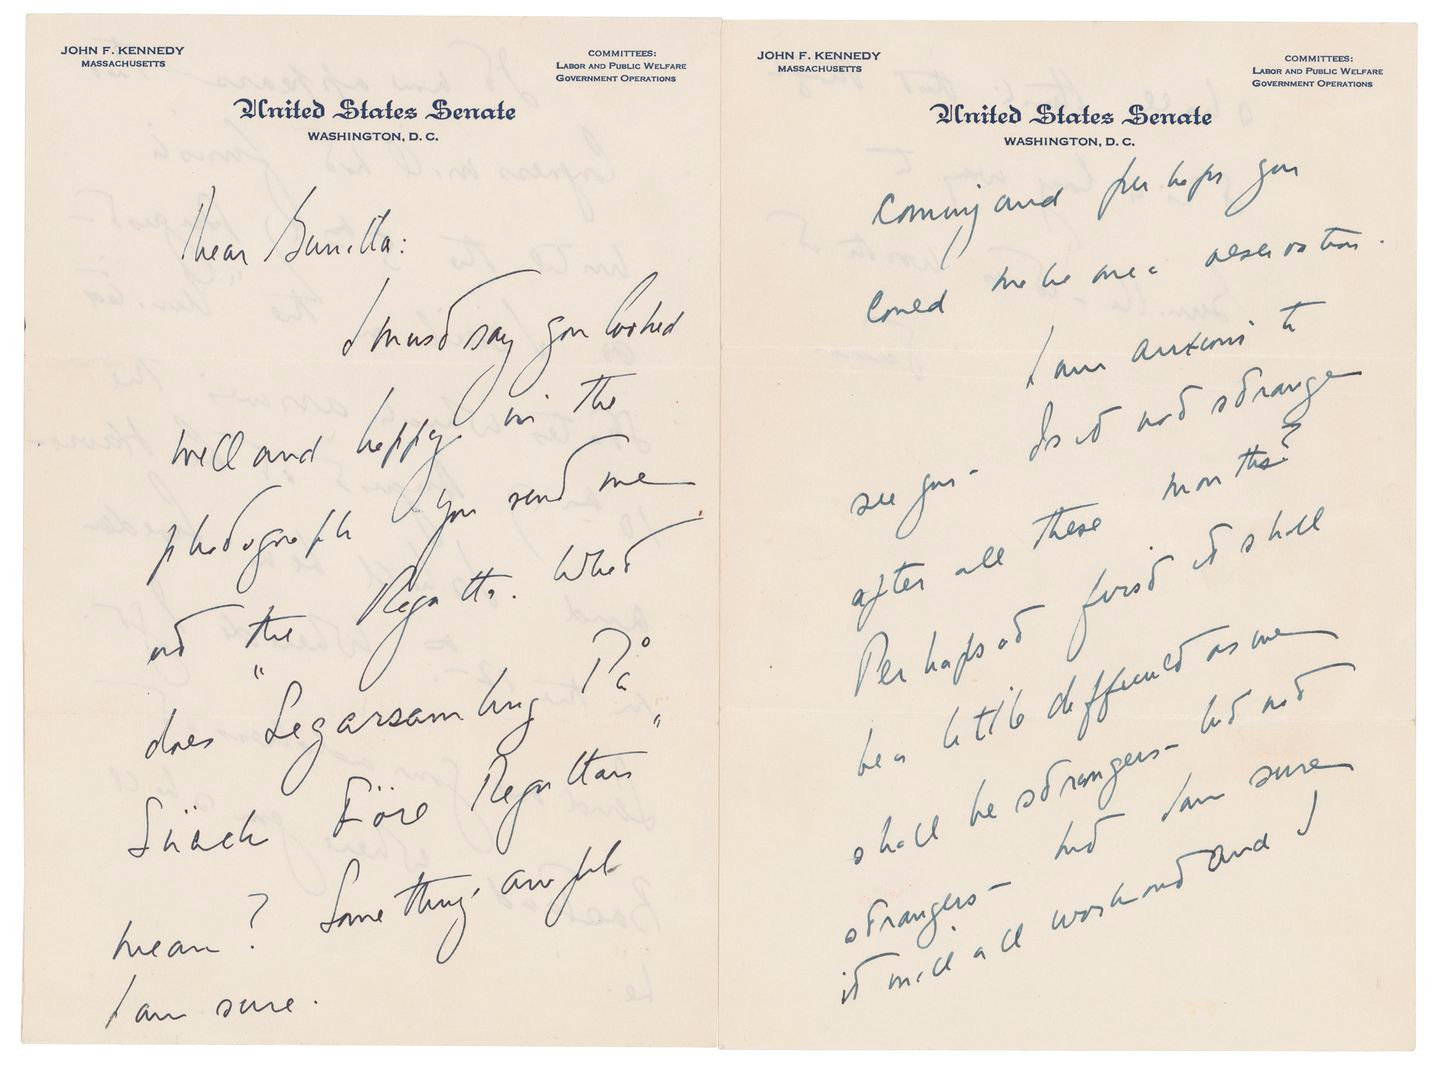 A love letter that John F. Kennedy wrote to a Swedish paramour a few years after he married Jacqueline Bouvier.